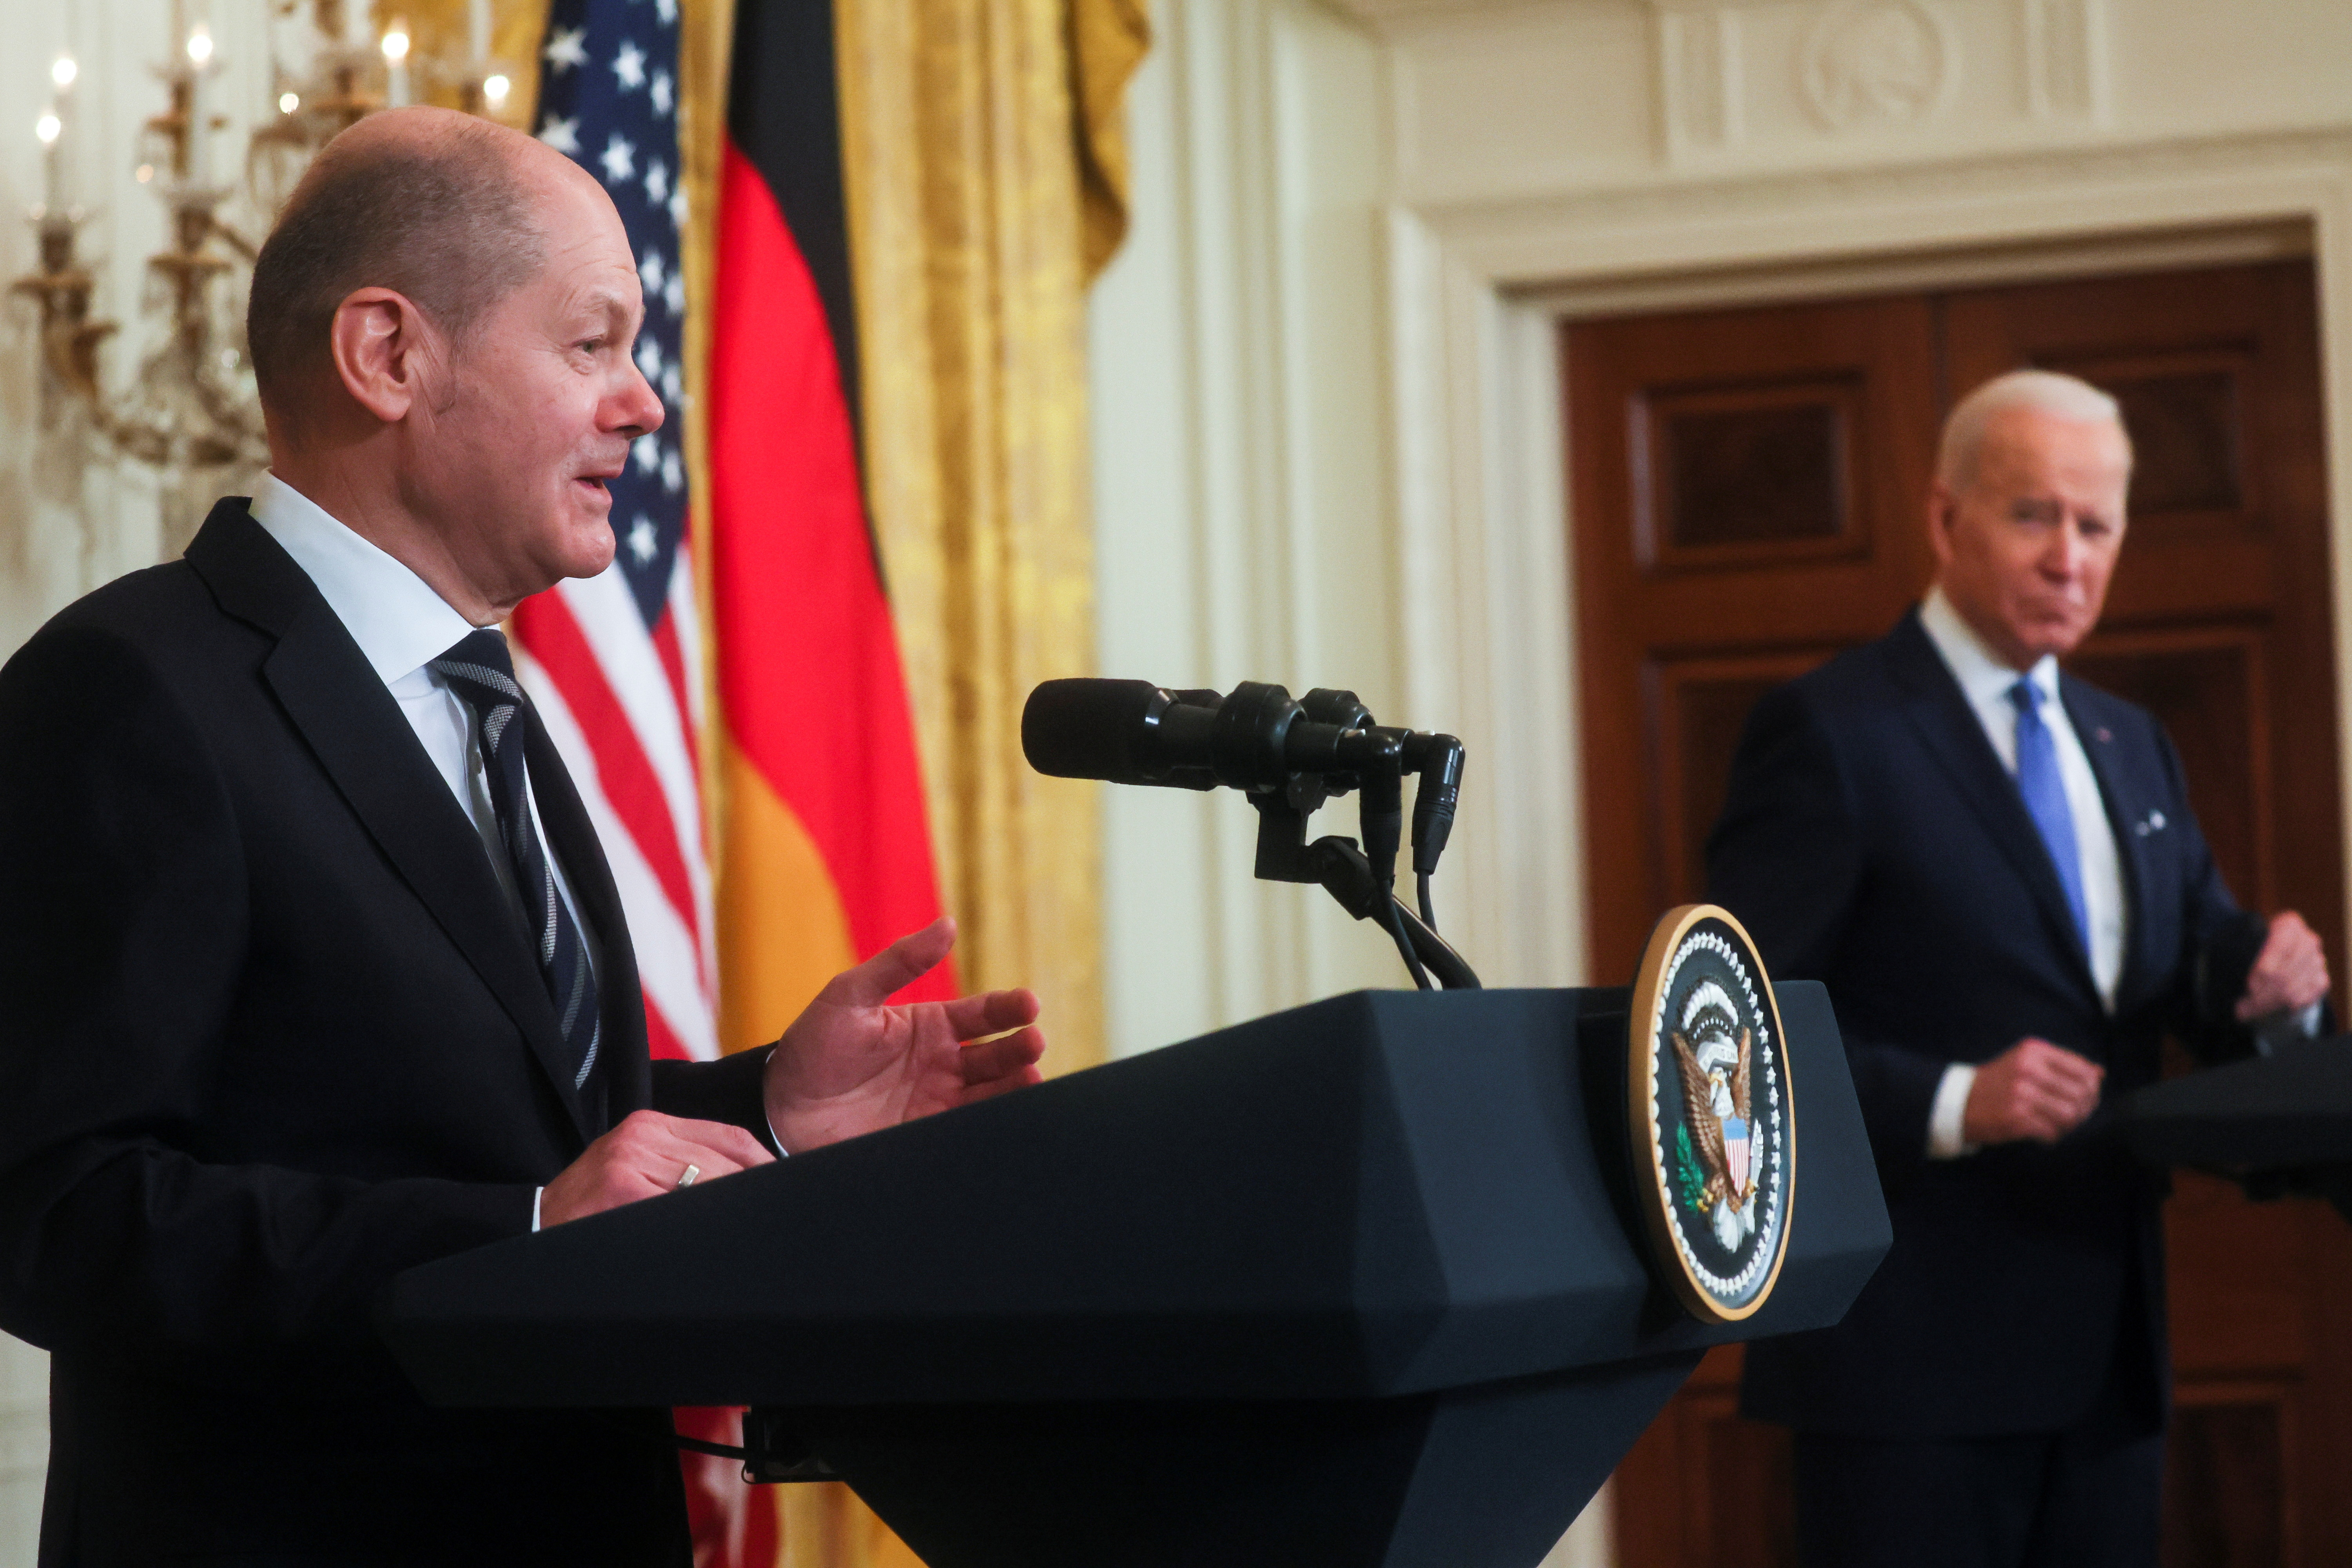 U.S. President Biden holds joint news conference with Germany's Chancellor Scholz in Washington